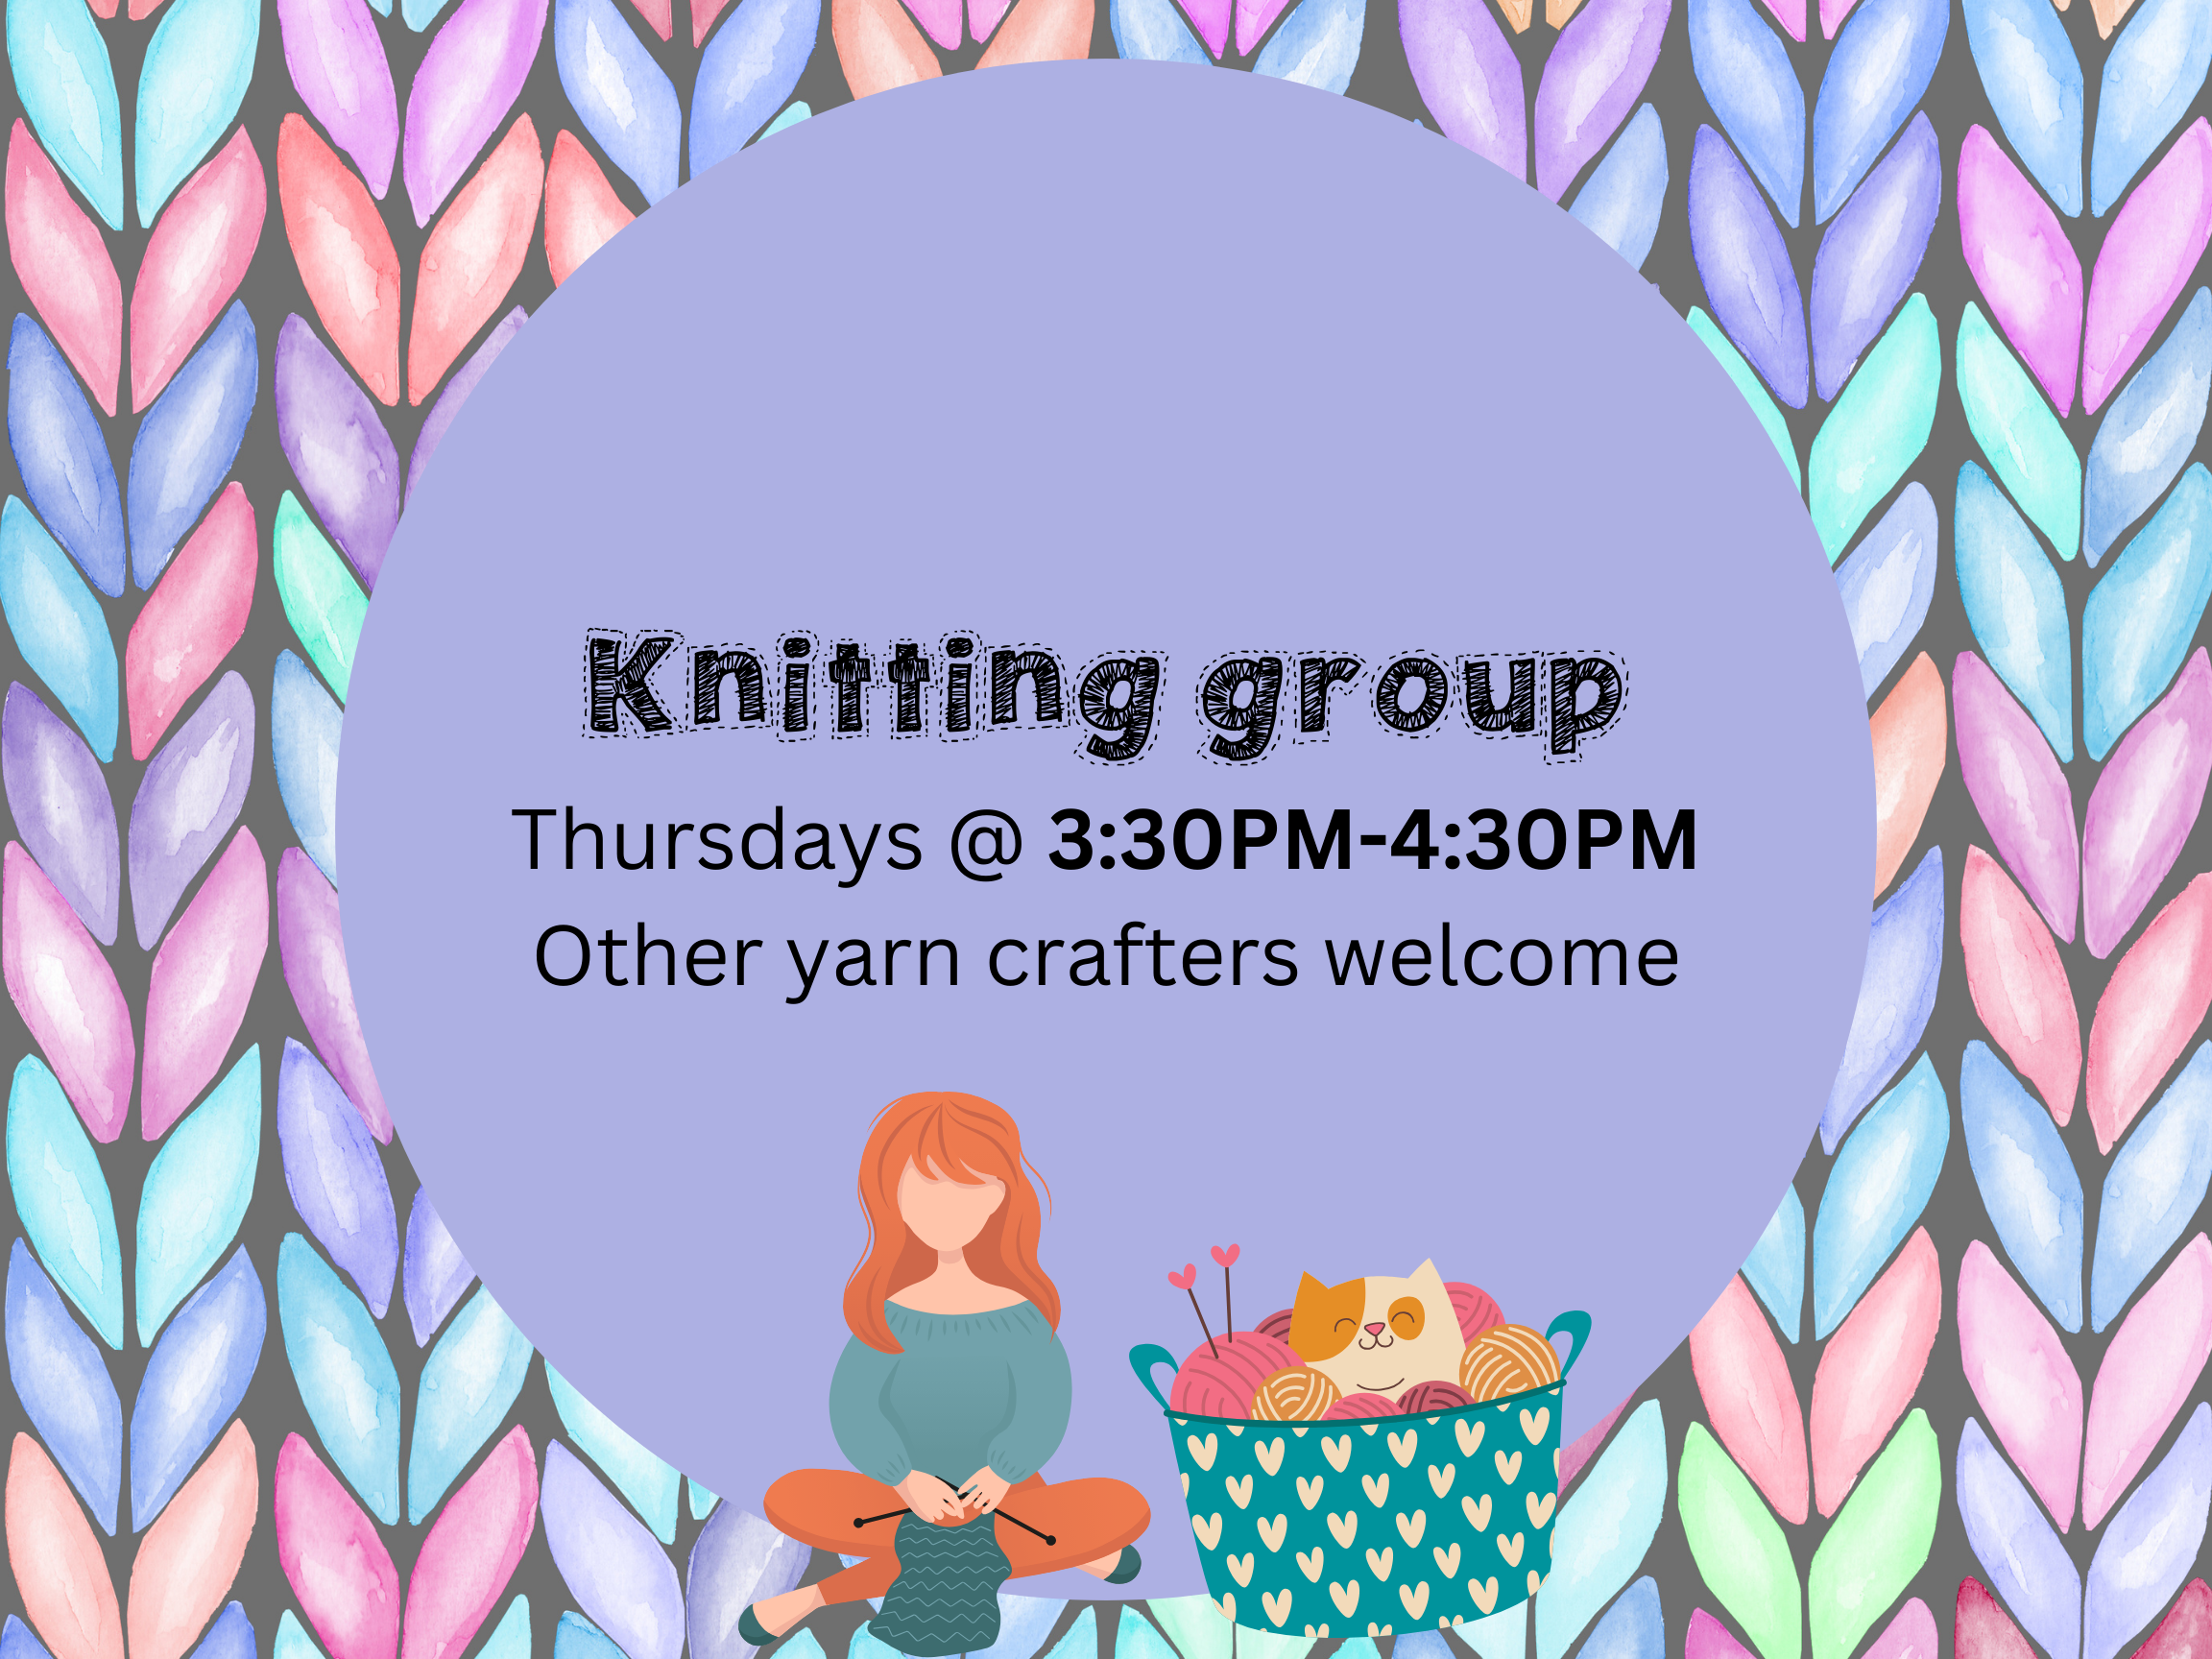 Knittng Club Flyer. 3:30PM every Thursday.